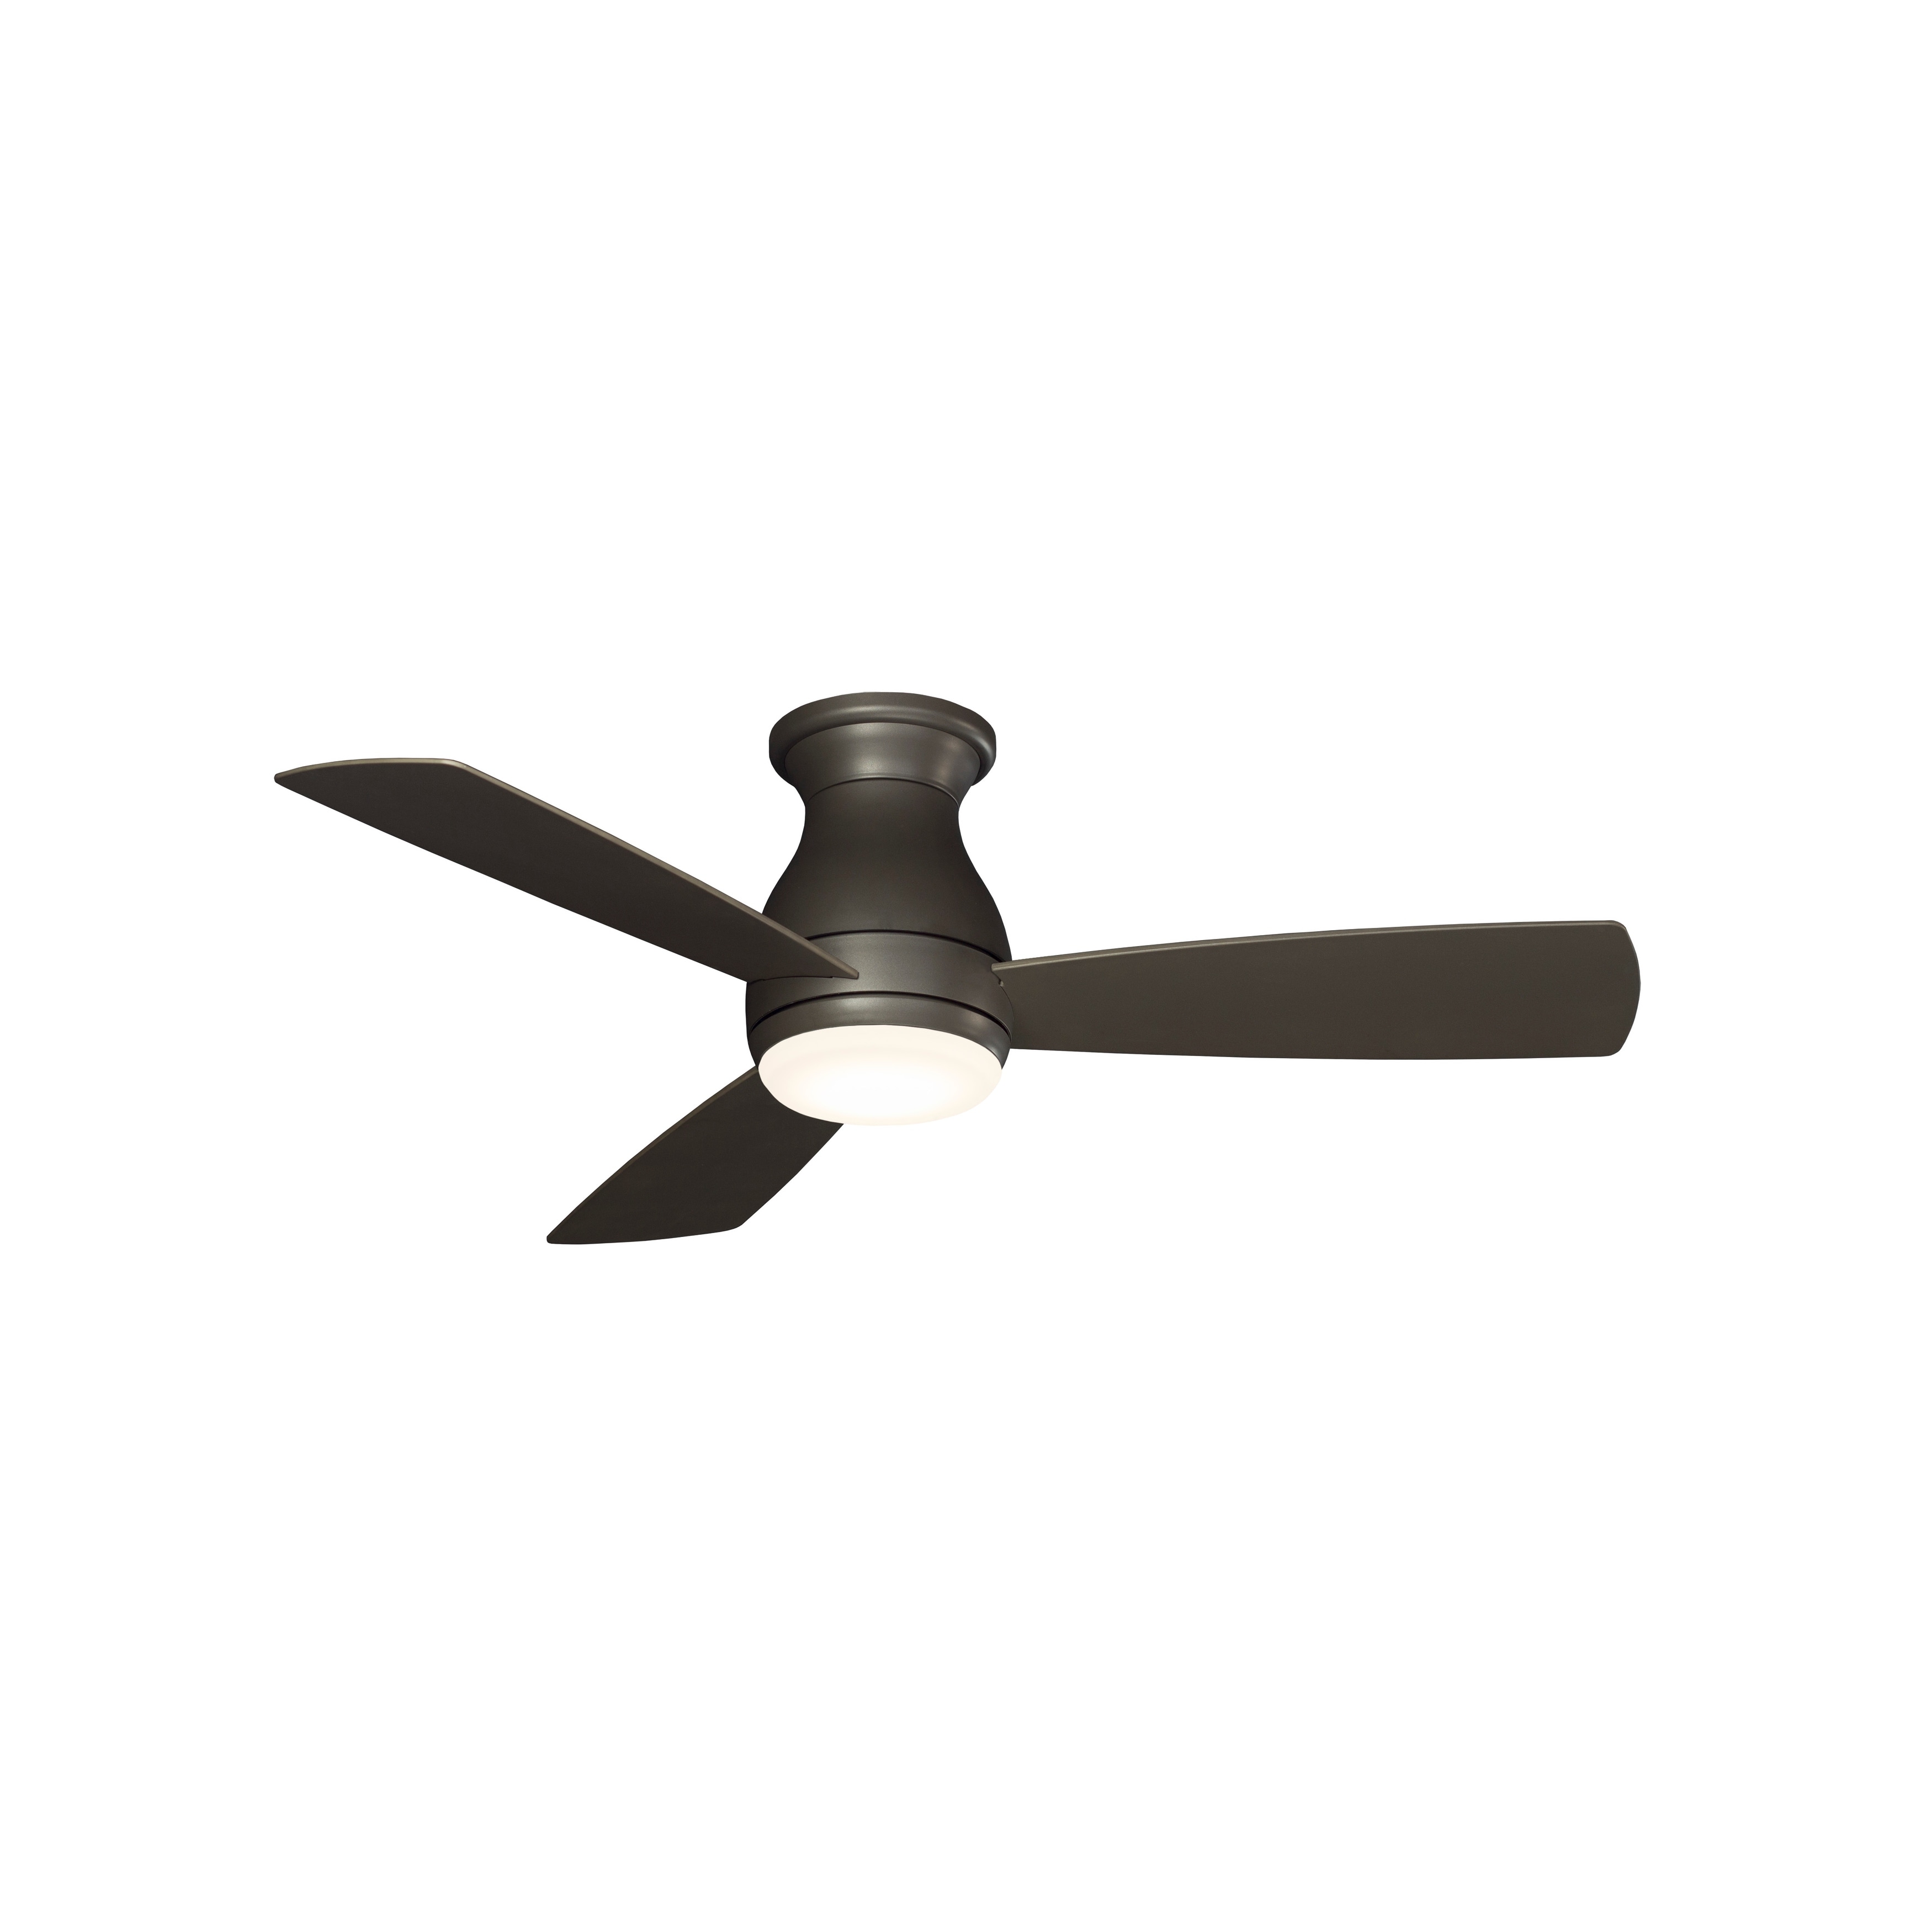 Hugh - 44 inch Indoor/Outdoor Ceiling Fan with Blades and LED Light Kit - Matte Greige